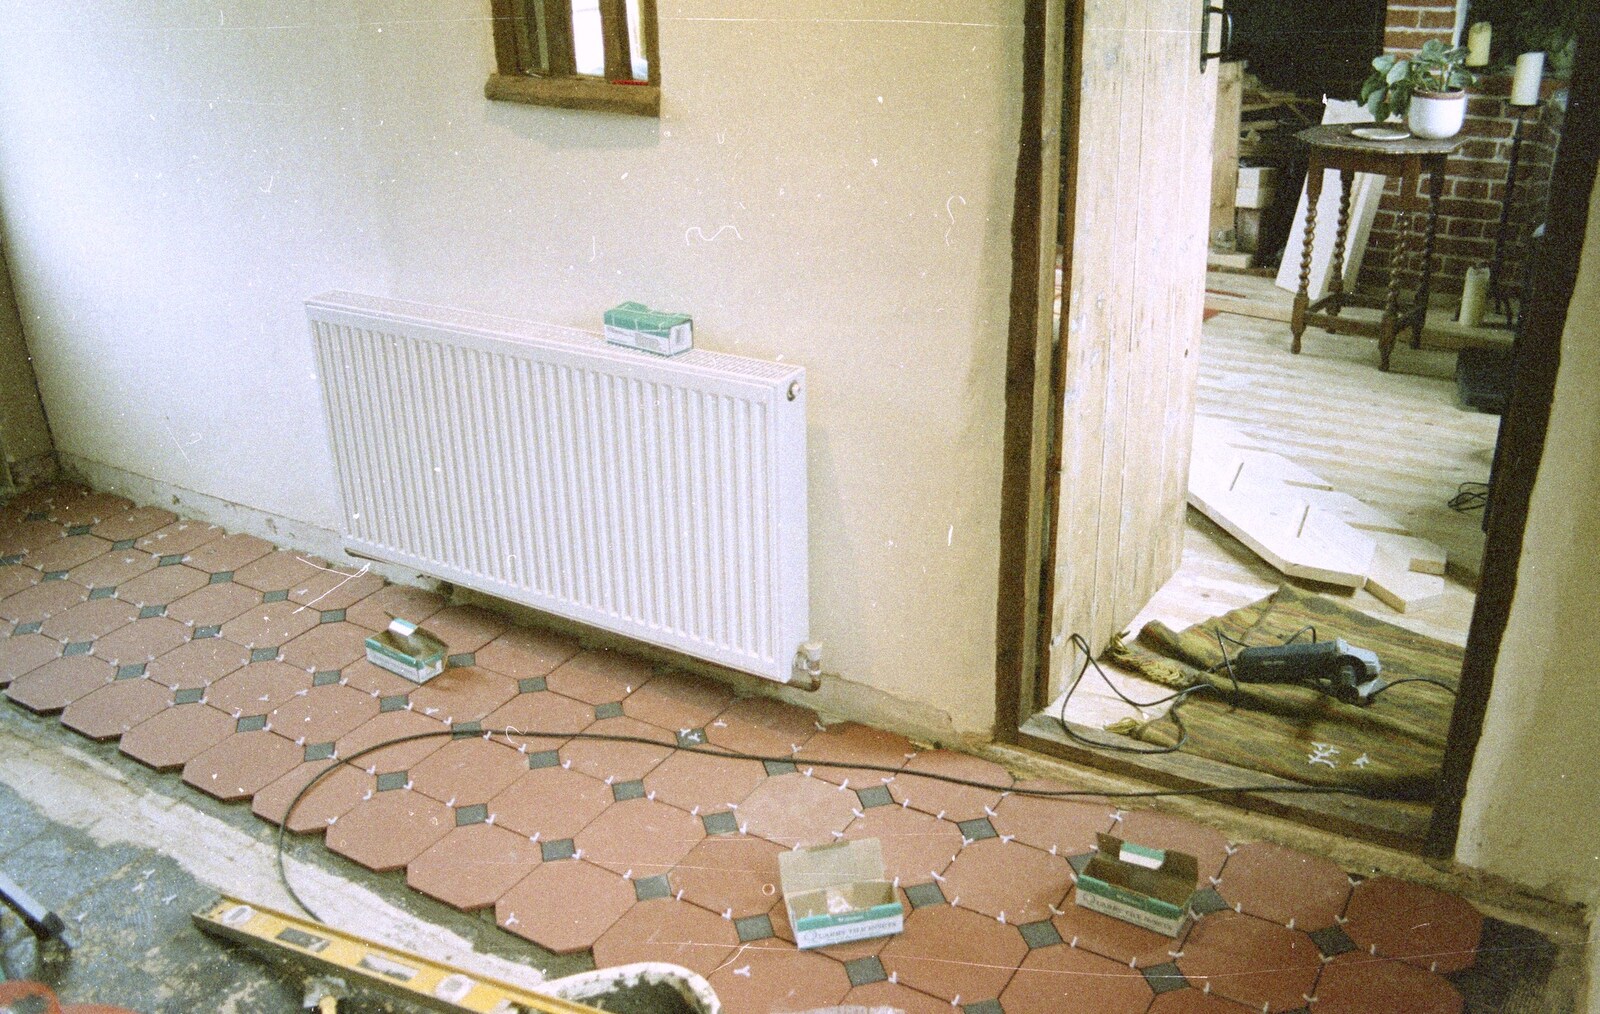 New tiles are laid in the hall from 3G Lab, and Building a Staircase, Brome, Suffolk - 11th February 2001